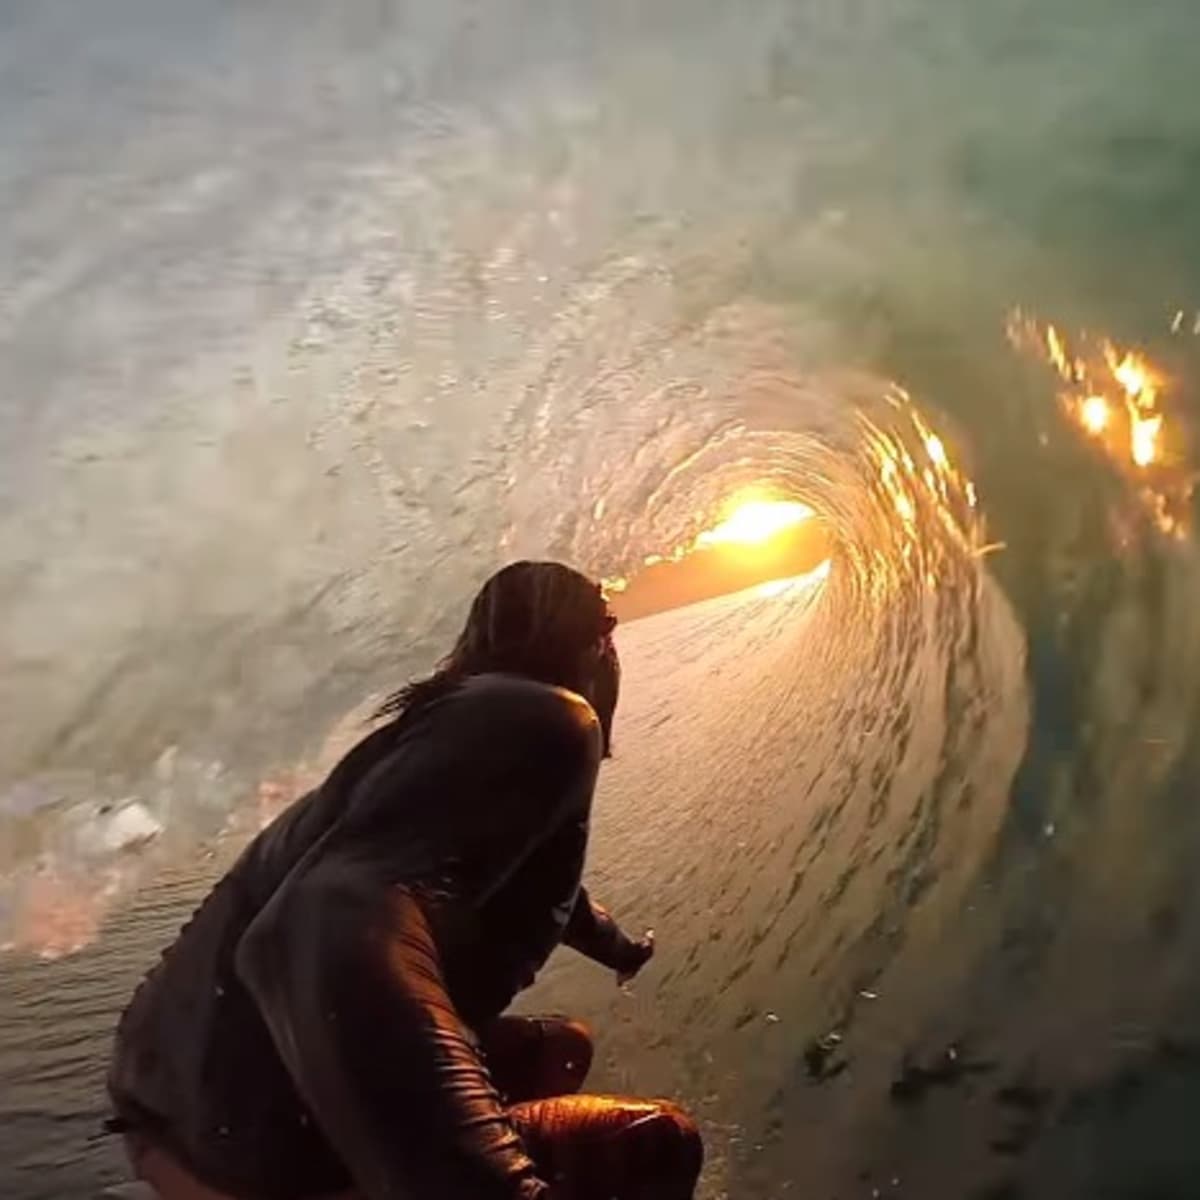 Relax with this gorgeous 360 VR surfing video